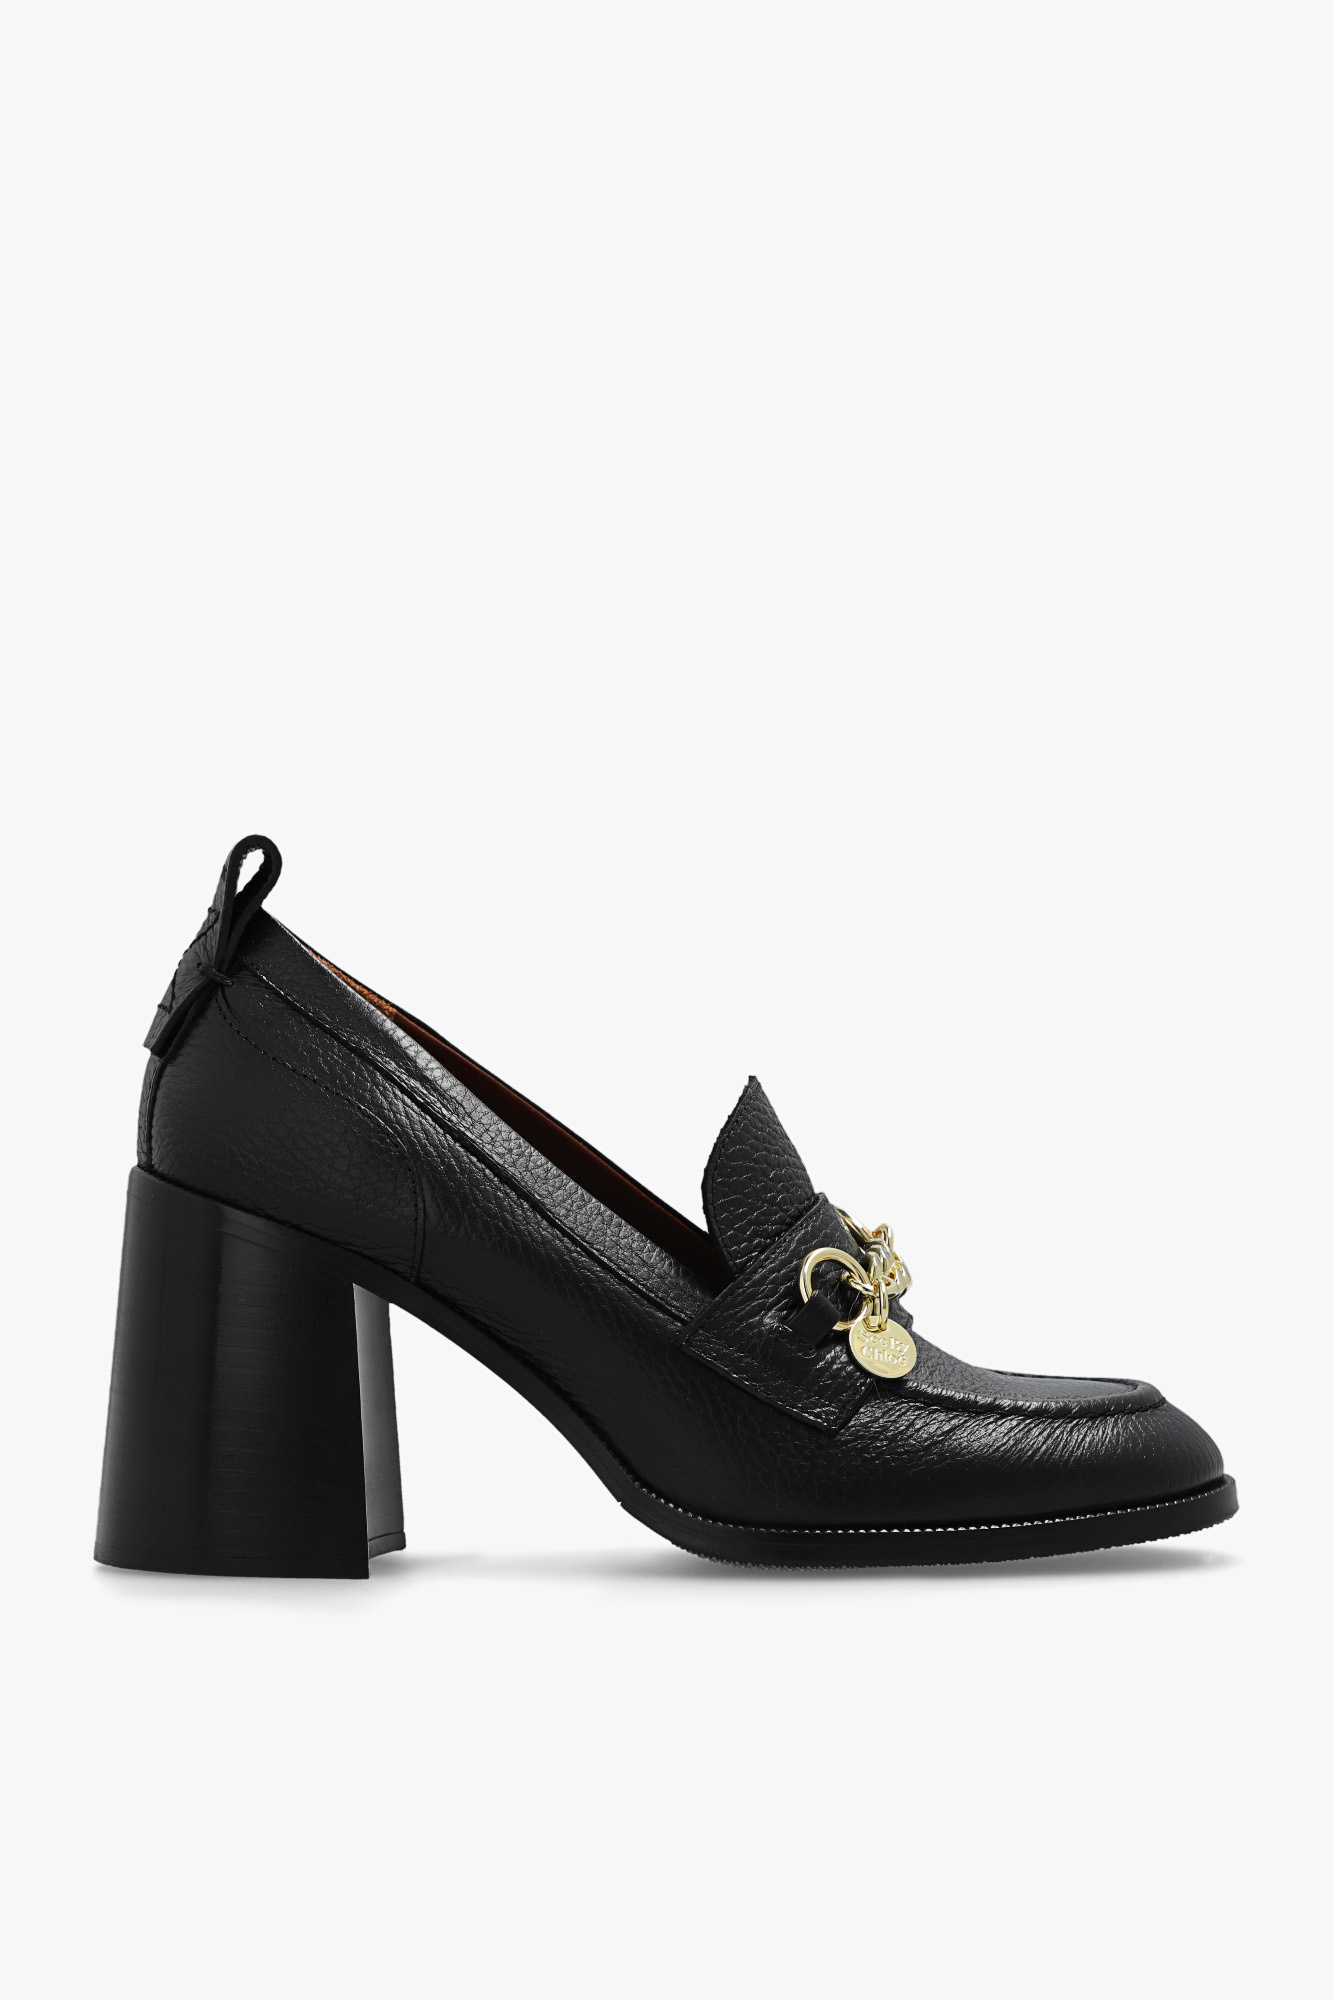 See By Chloé ‘Aryel’ loafer pumps | Women's Shoes | Vitkac